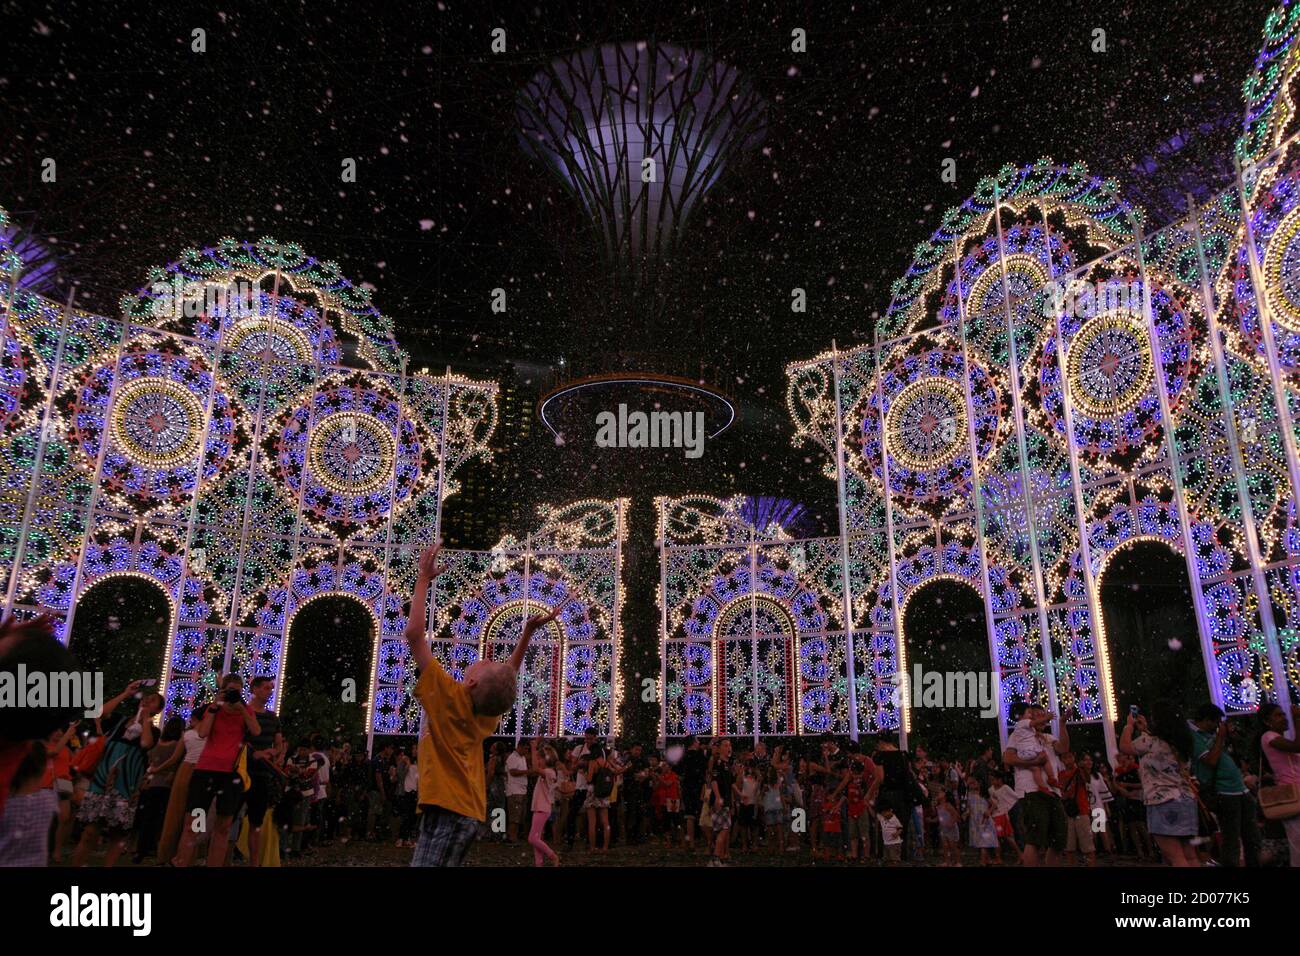 People Play In Fake Snow Made Of Foam As Part Of Christmas Wonderland At Gardens By The Bay In Singapore December 19 14 Reuters Edgar Su Singapore s Society Stock Photo Alamy